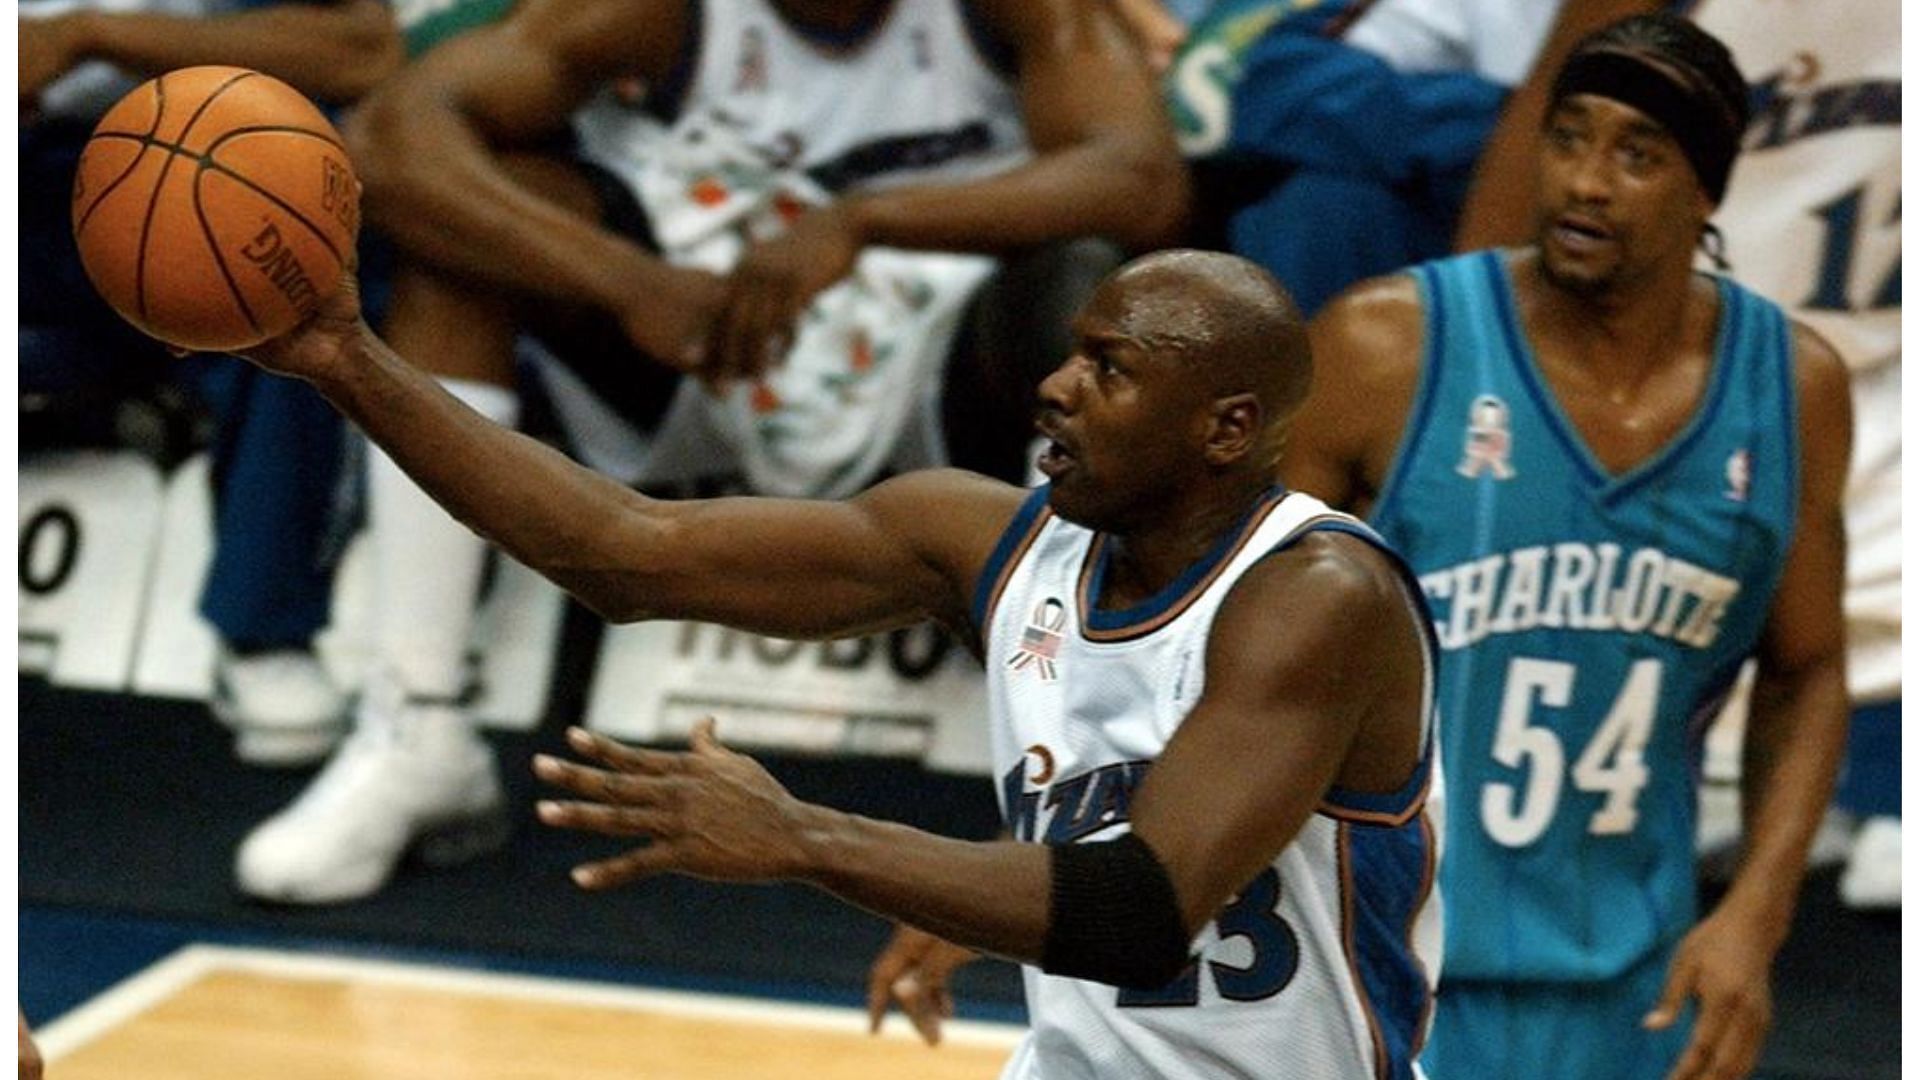 Michael Jordan in action against the Charlotte Hornets [Source: USA Today]